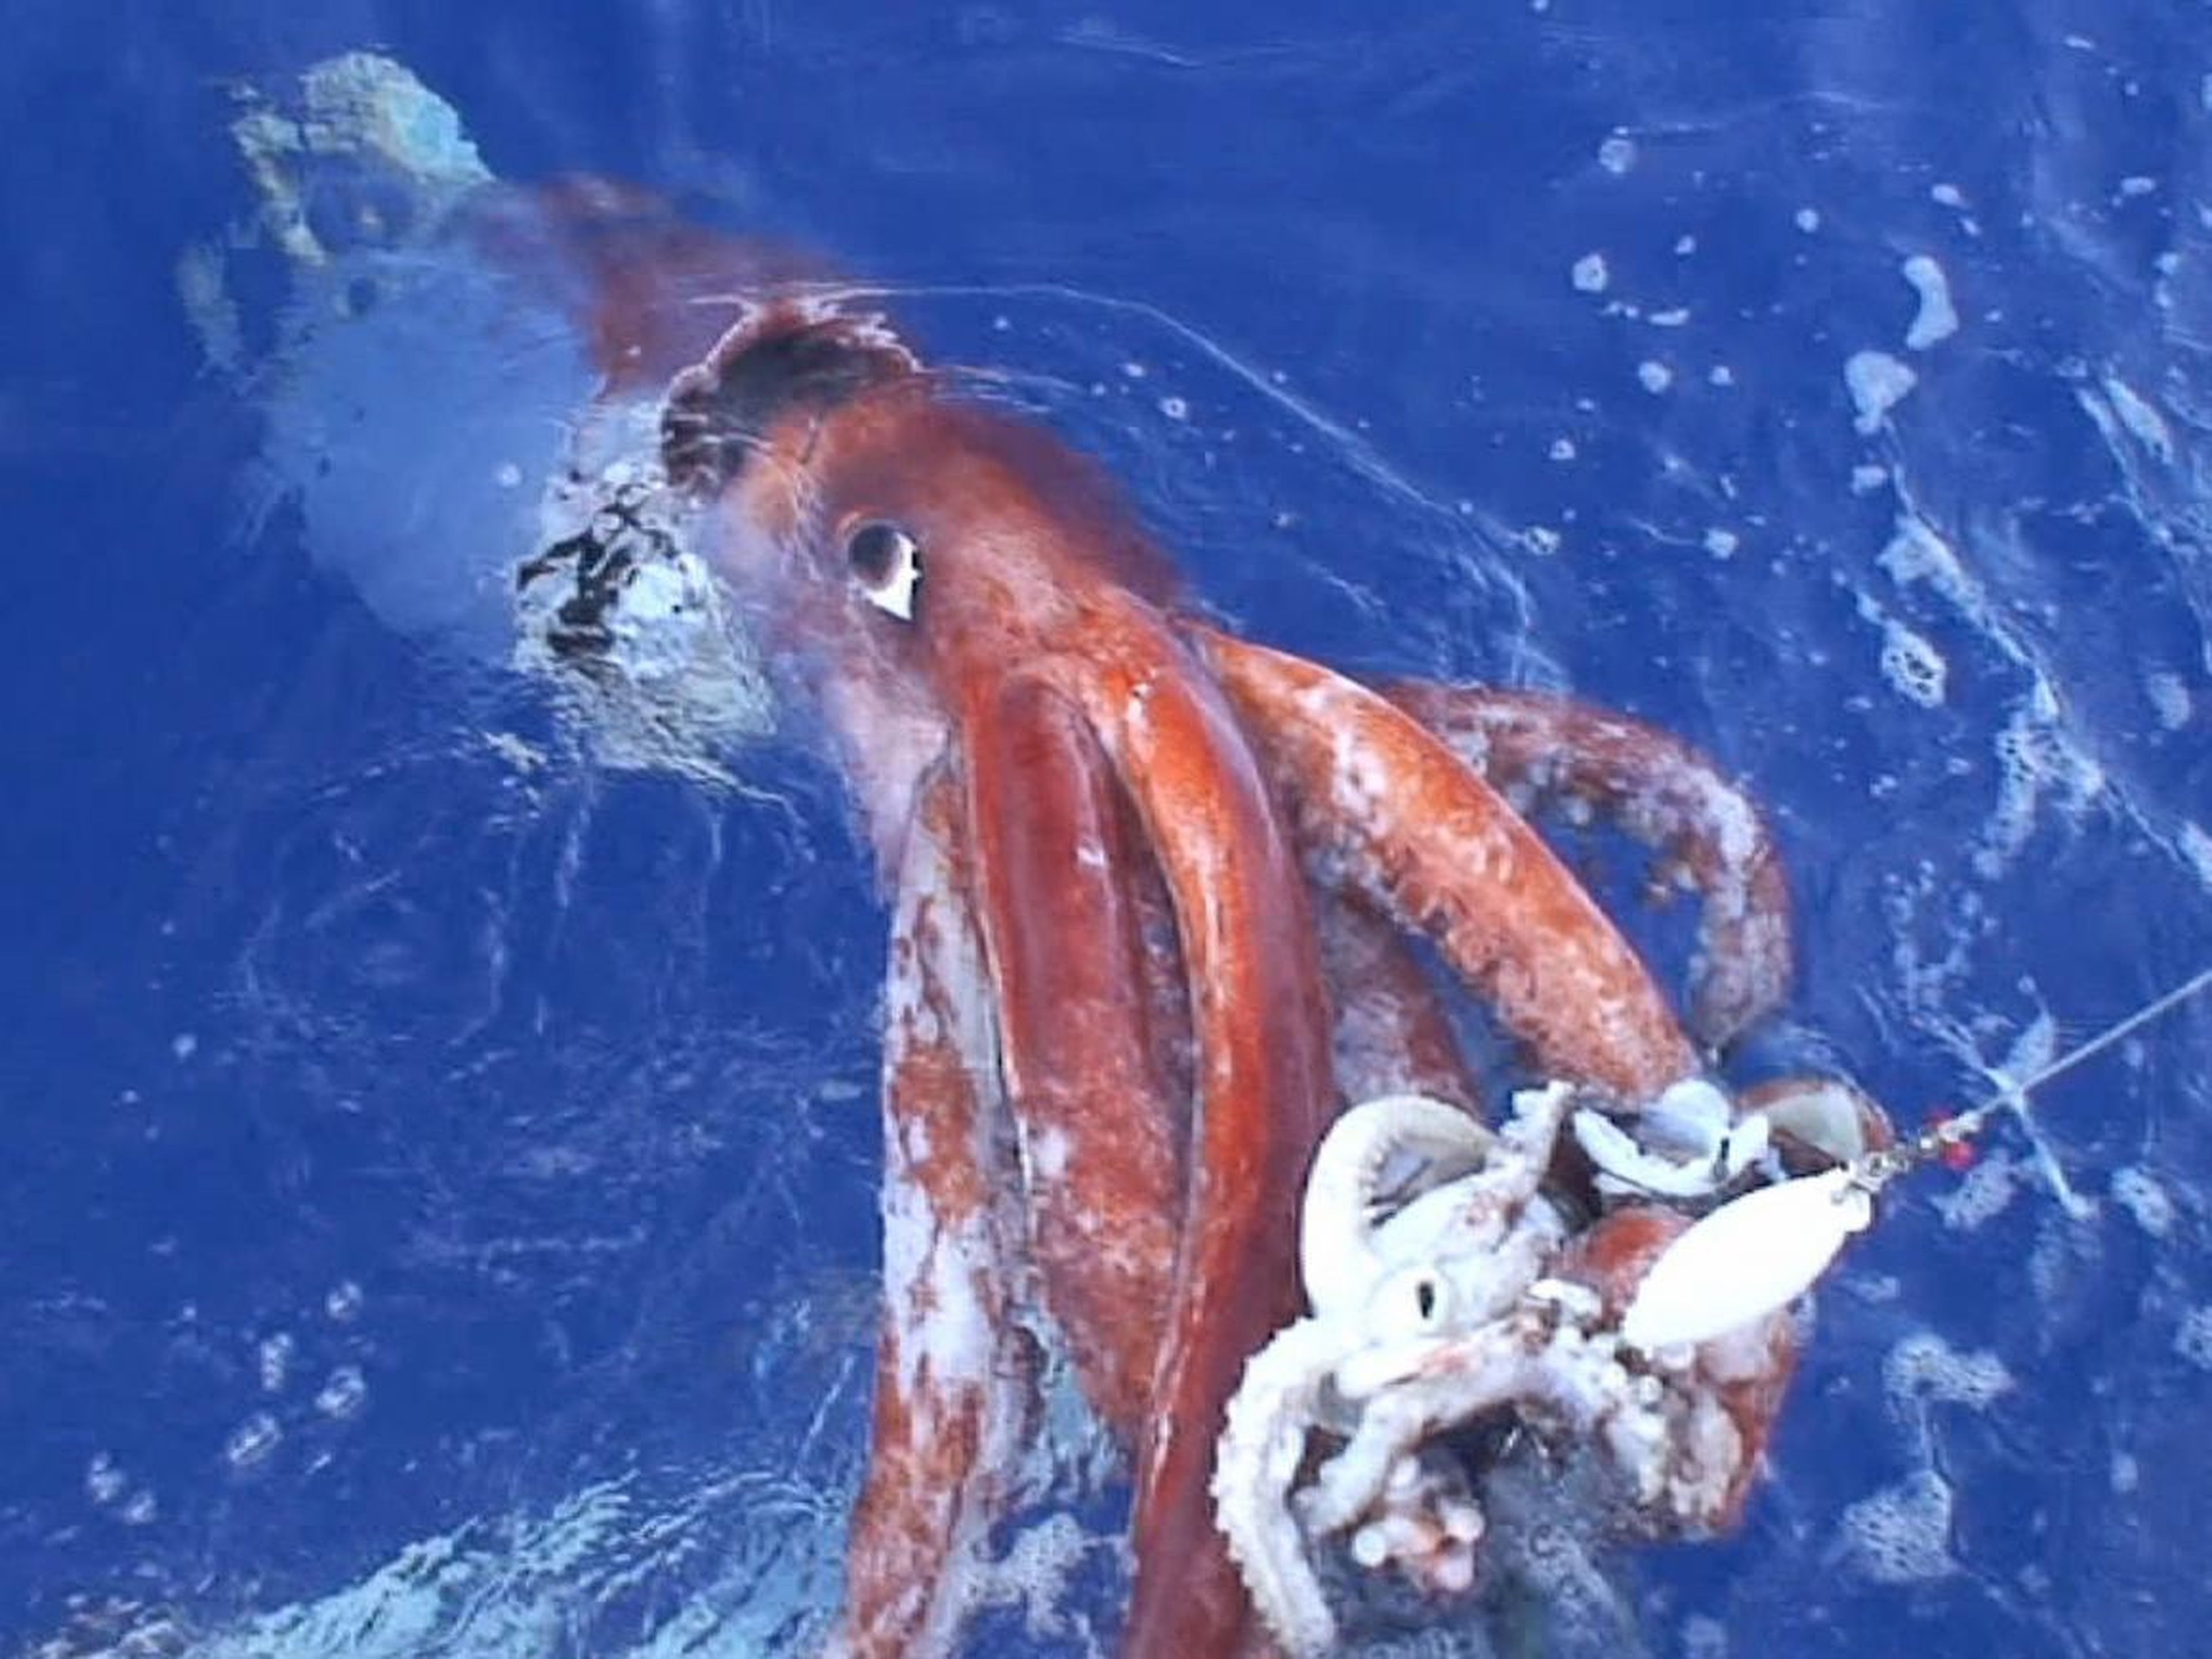 In this photo released by Tsunemi Kubodera, a researcher with Japan's National Science Museum, a giant squid attacks a bait squid off the Ogasawara Islands, south of Tokyo, on December 4, 2006.